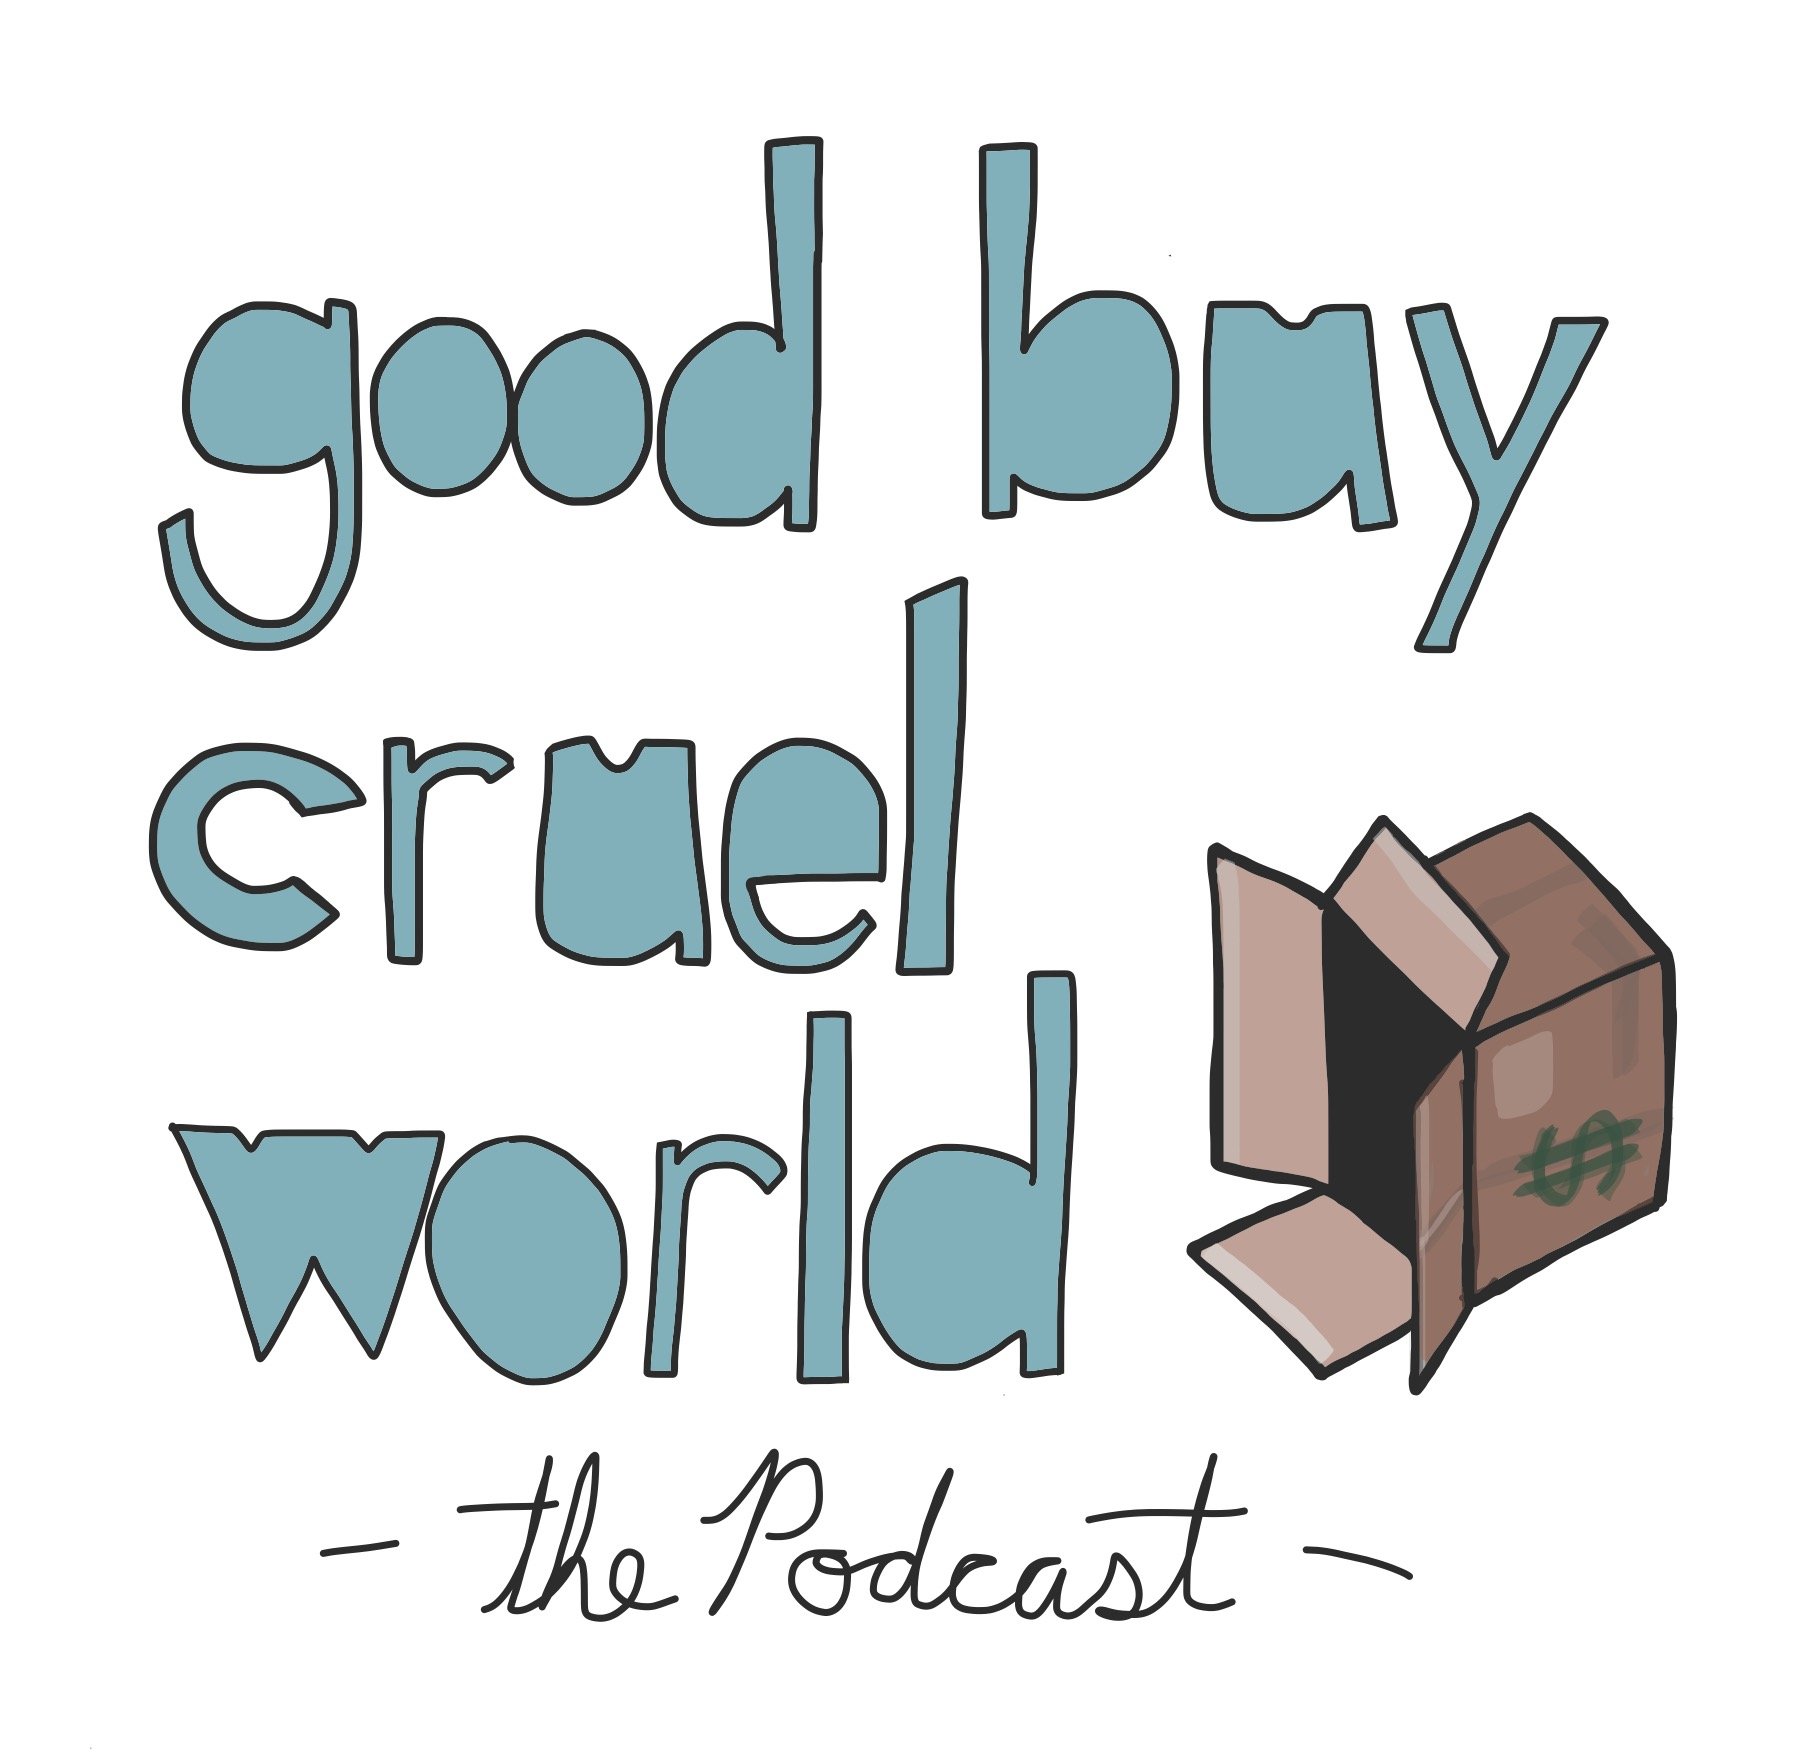 Good Buy Cruel World is the podcast where three friends pitch each other interesting products for sale on the internet.
#mbmbaminopodcasters #PodernFamily